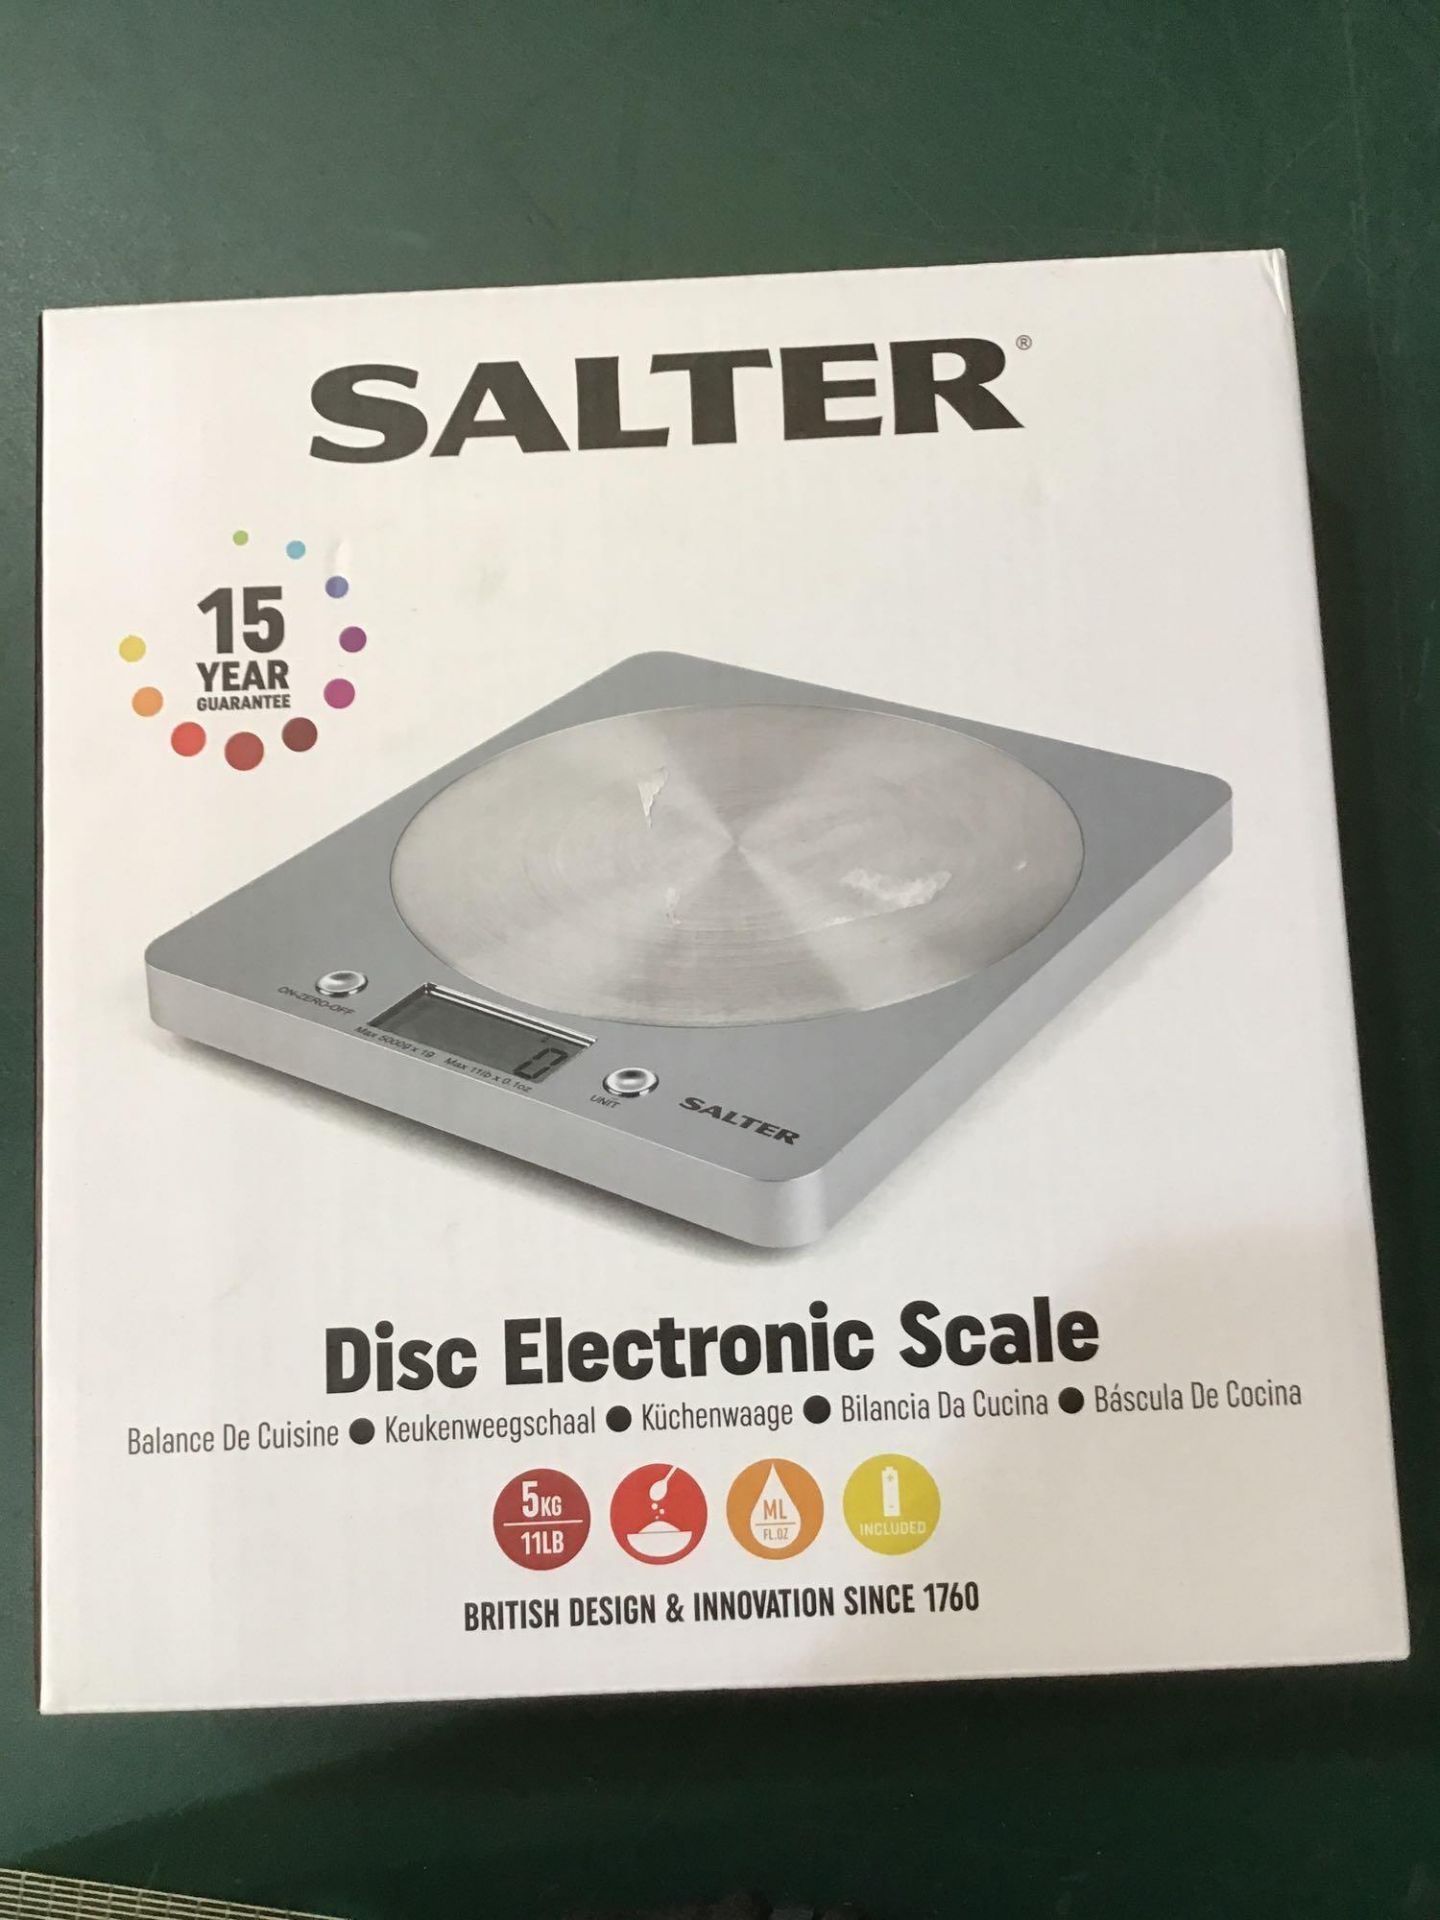 Salter Digital Kitchen Weighing Scales - Slim Design Electronic Cooking Appliance £12.89 RRP - Image 2 of 5